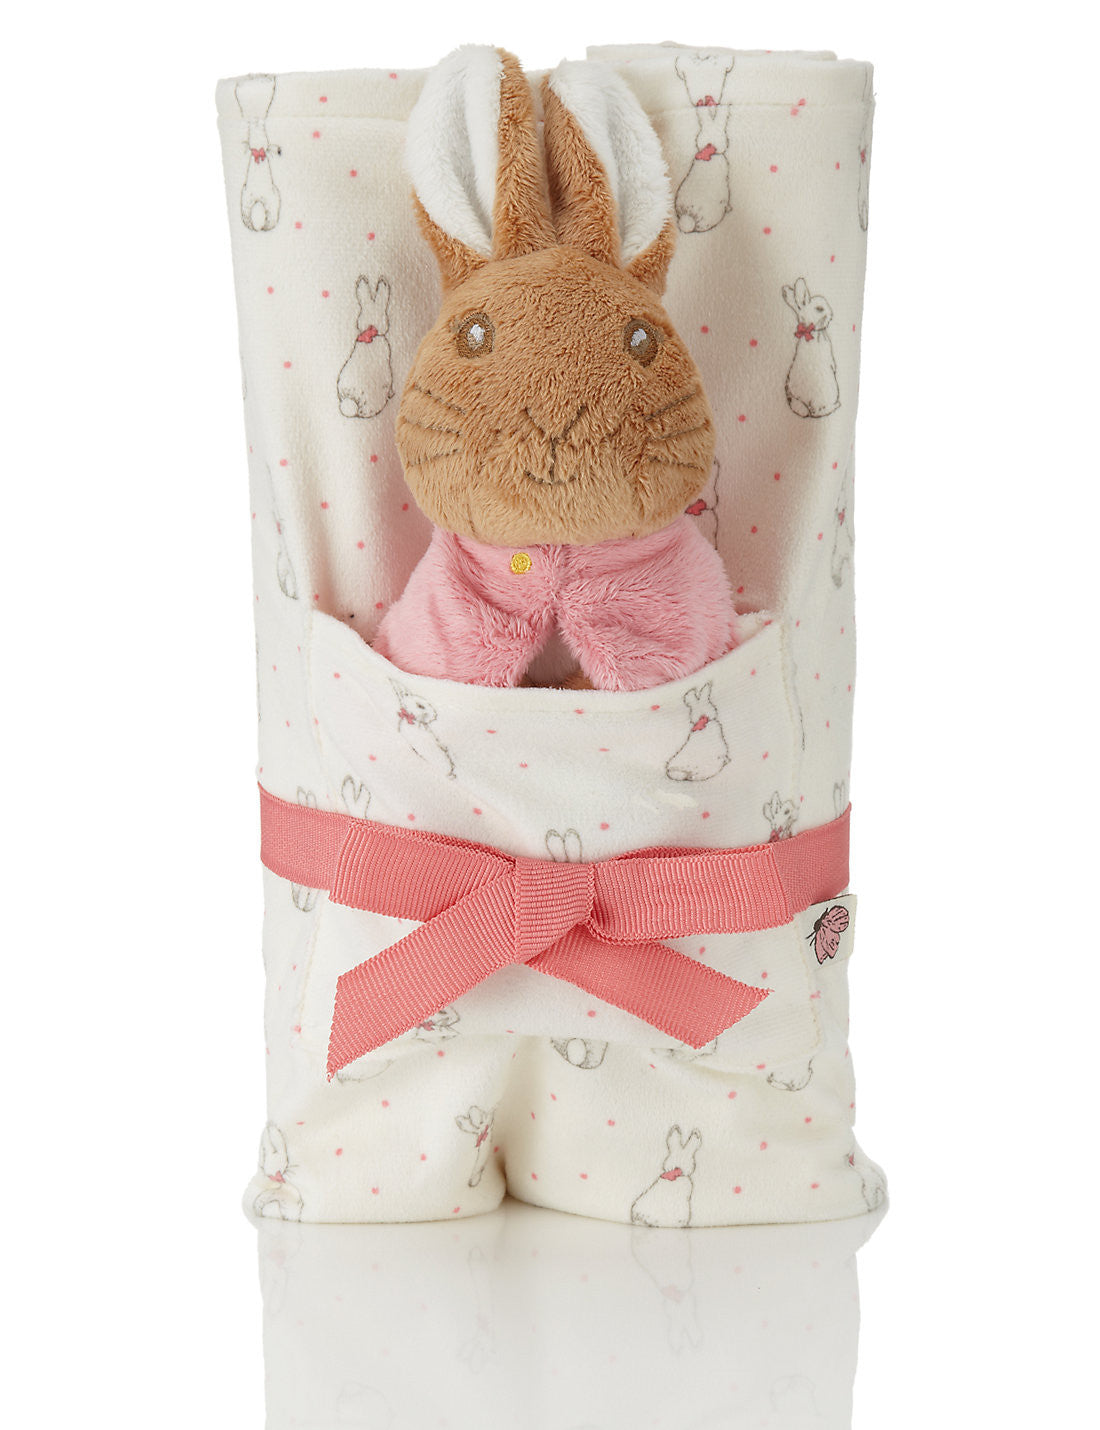 Flopsy, Mopsy, and Cotton-tail Toy and Blanket Set